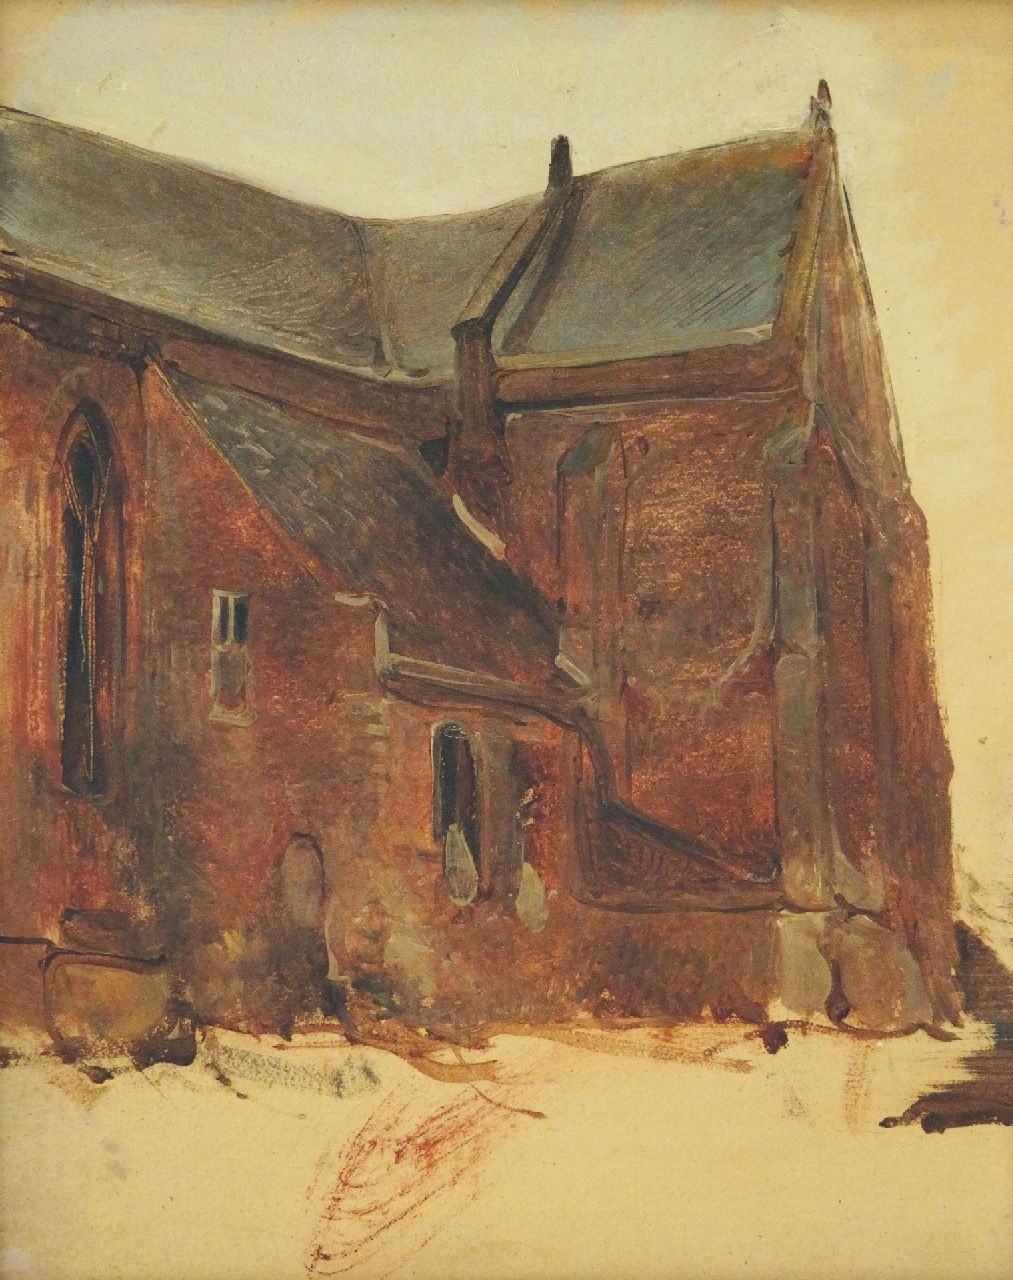 Bosboom J.  | Johannes Bosboom | Paintings offered for sale | Sketch of a church exterior, oil on panel 30.7 x 25.2 cm